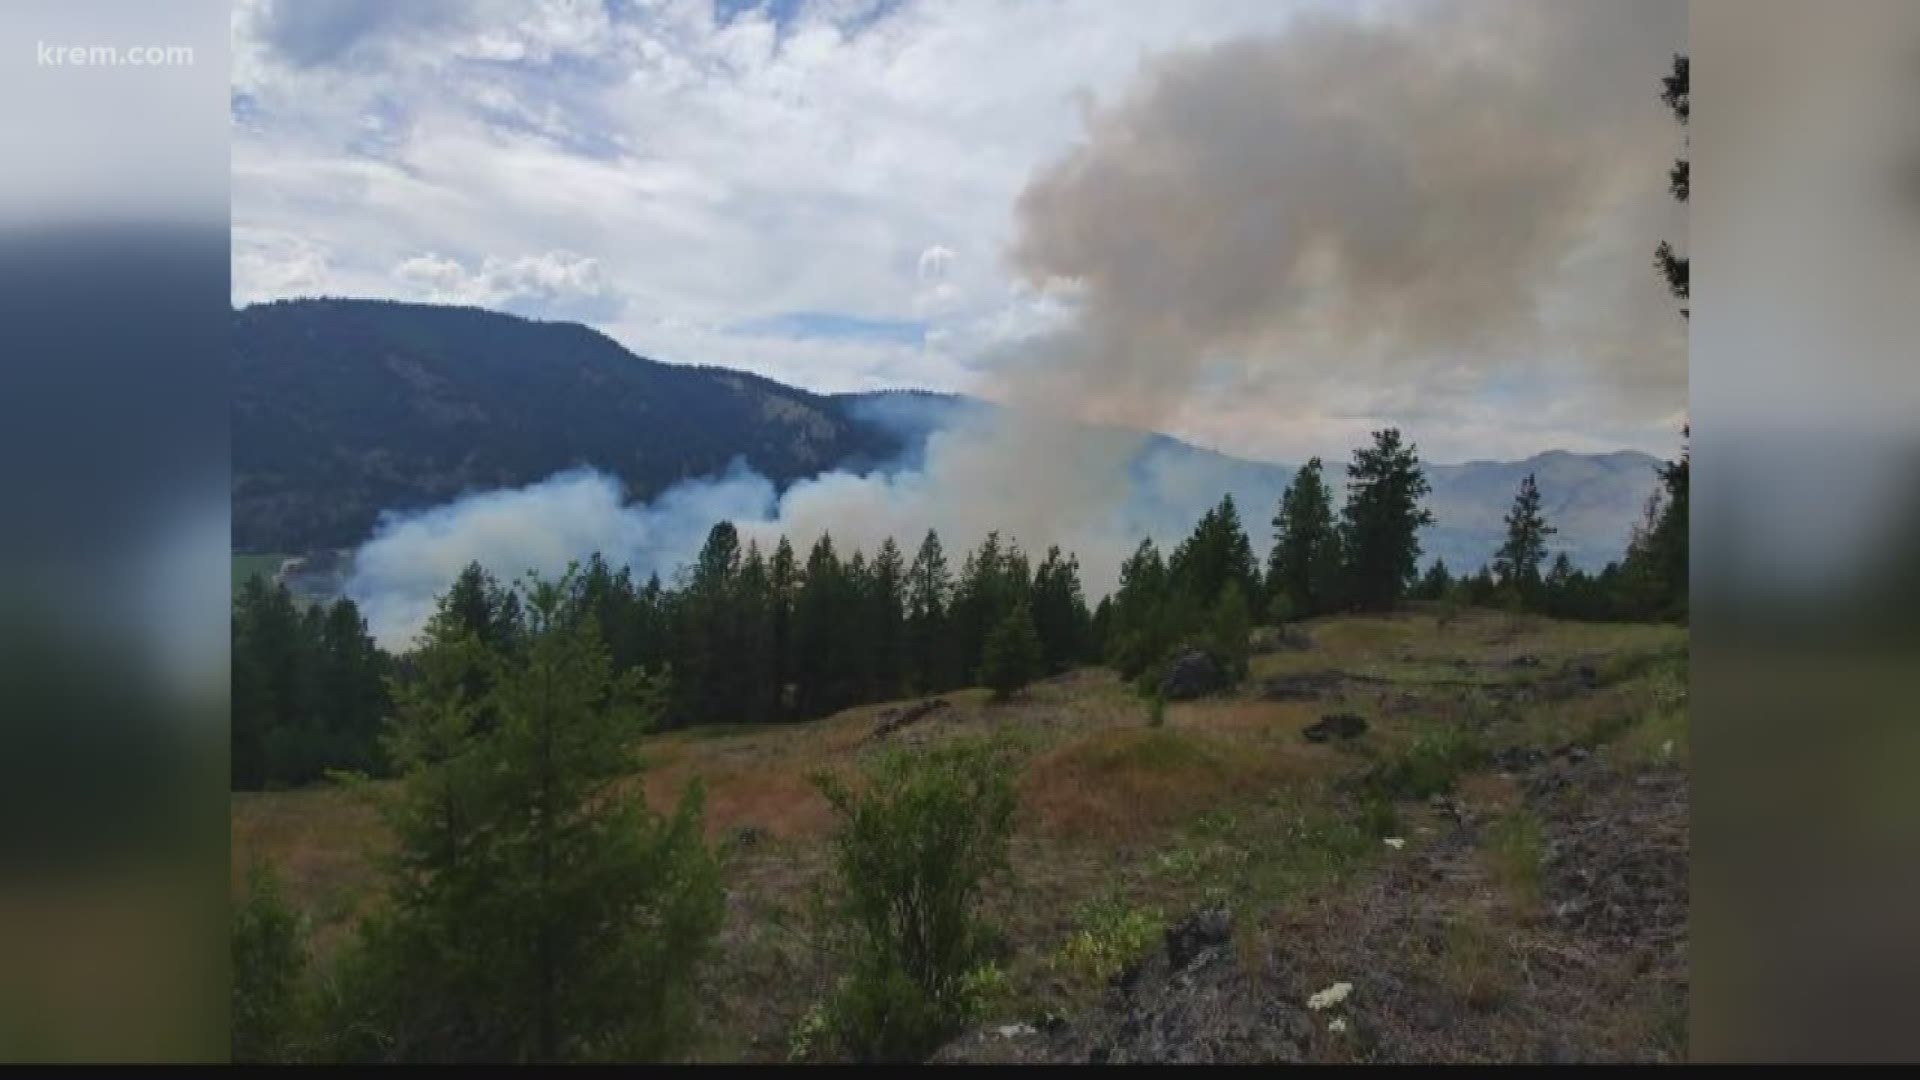 Level 3 evacuations ordered due to fire near Canadian border